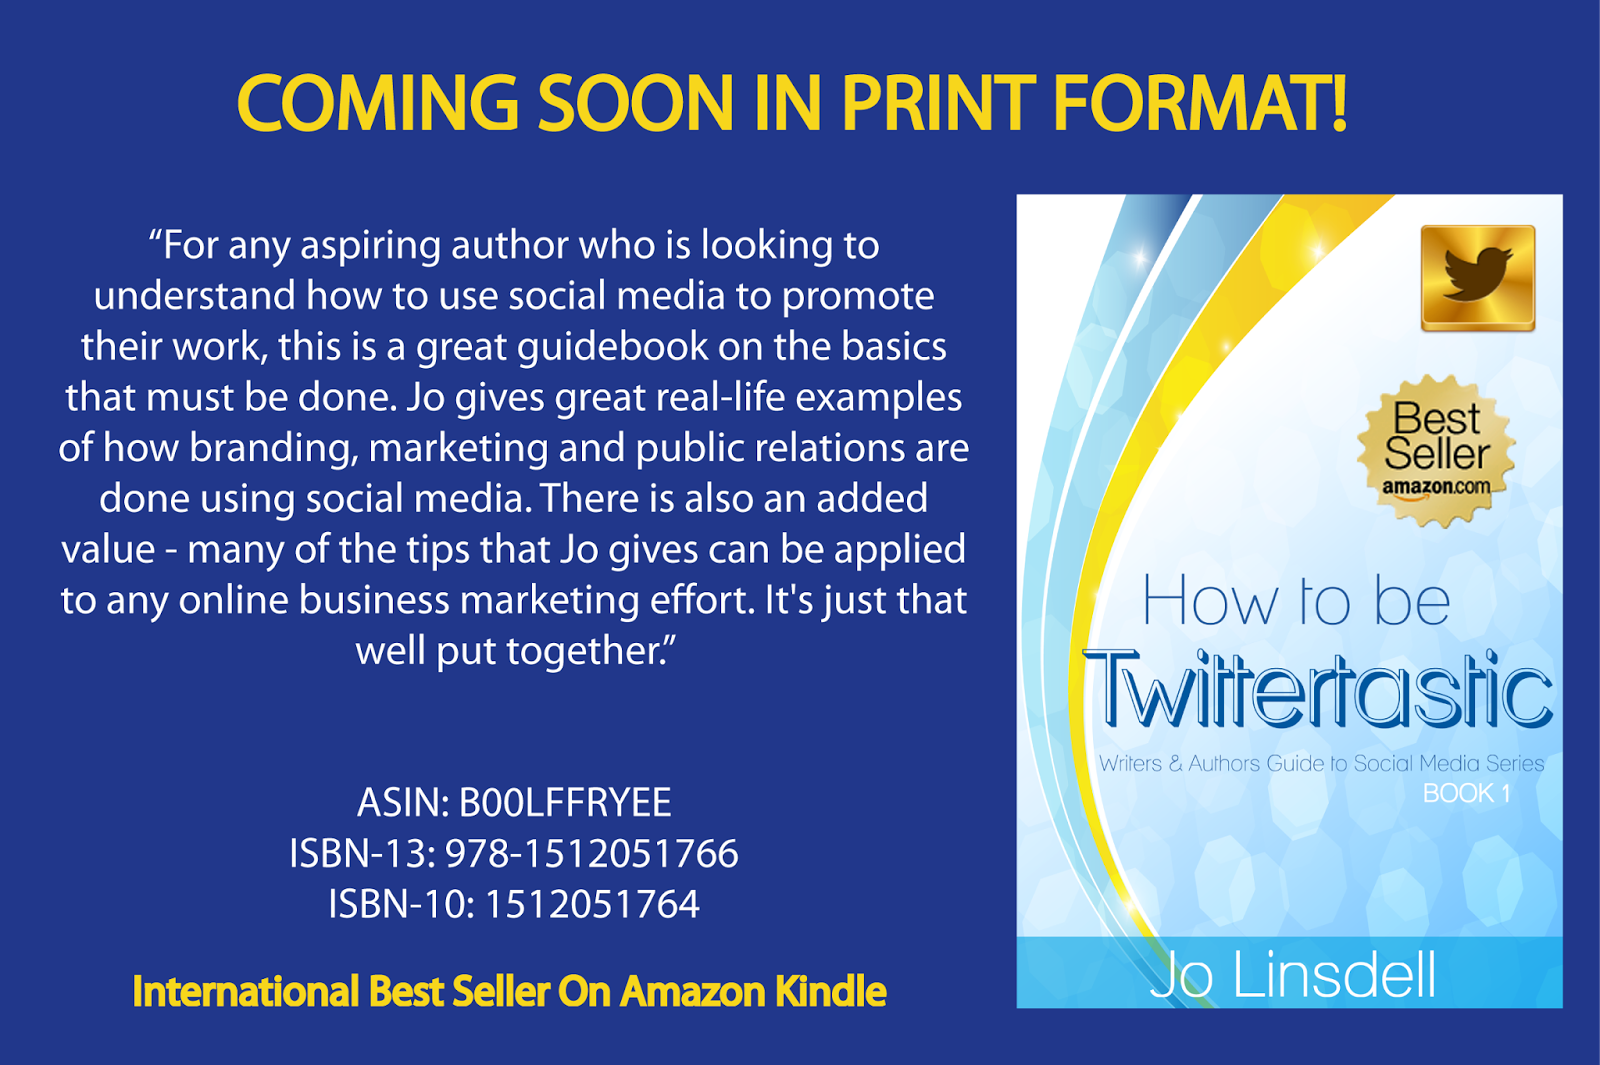 International Best Selling Book "How to be Twittertastic" to be Released in Print Format